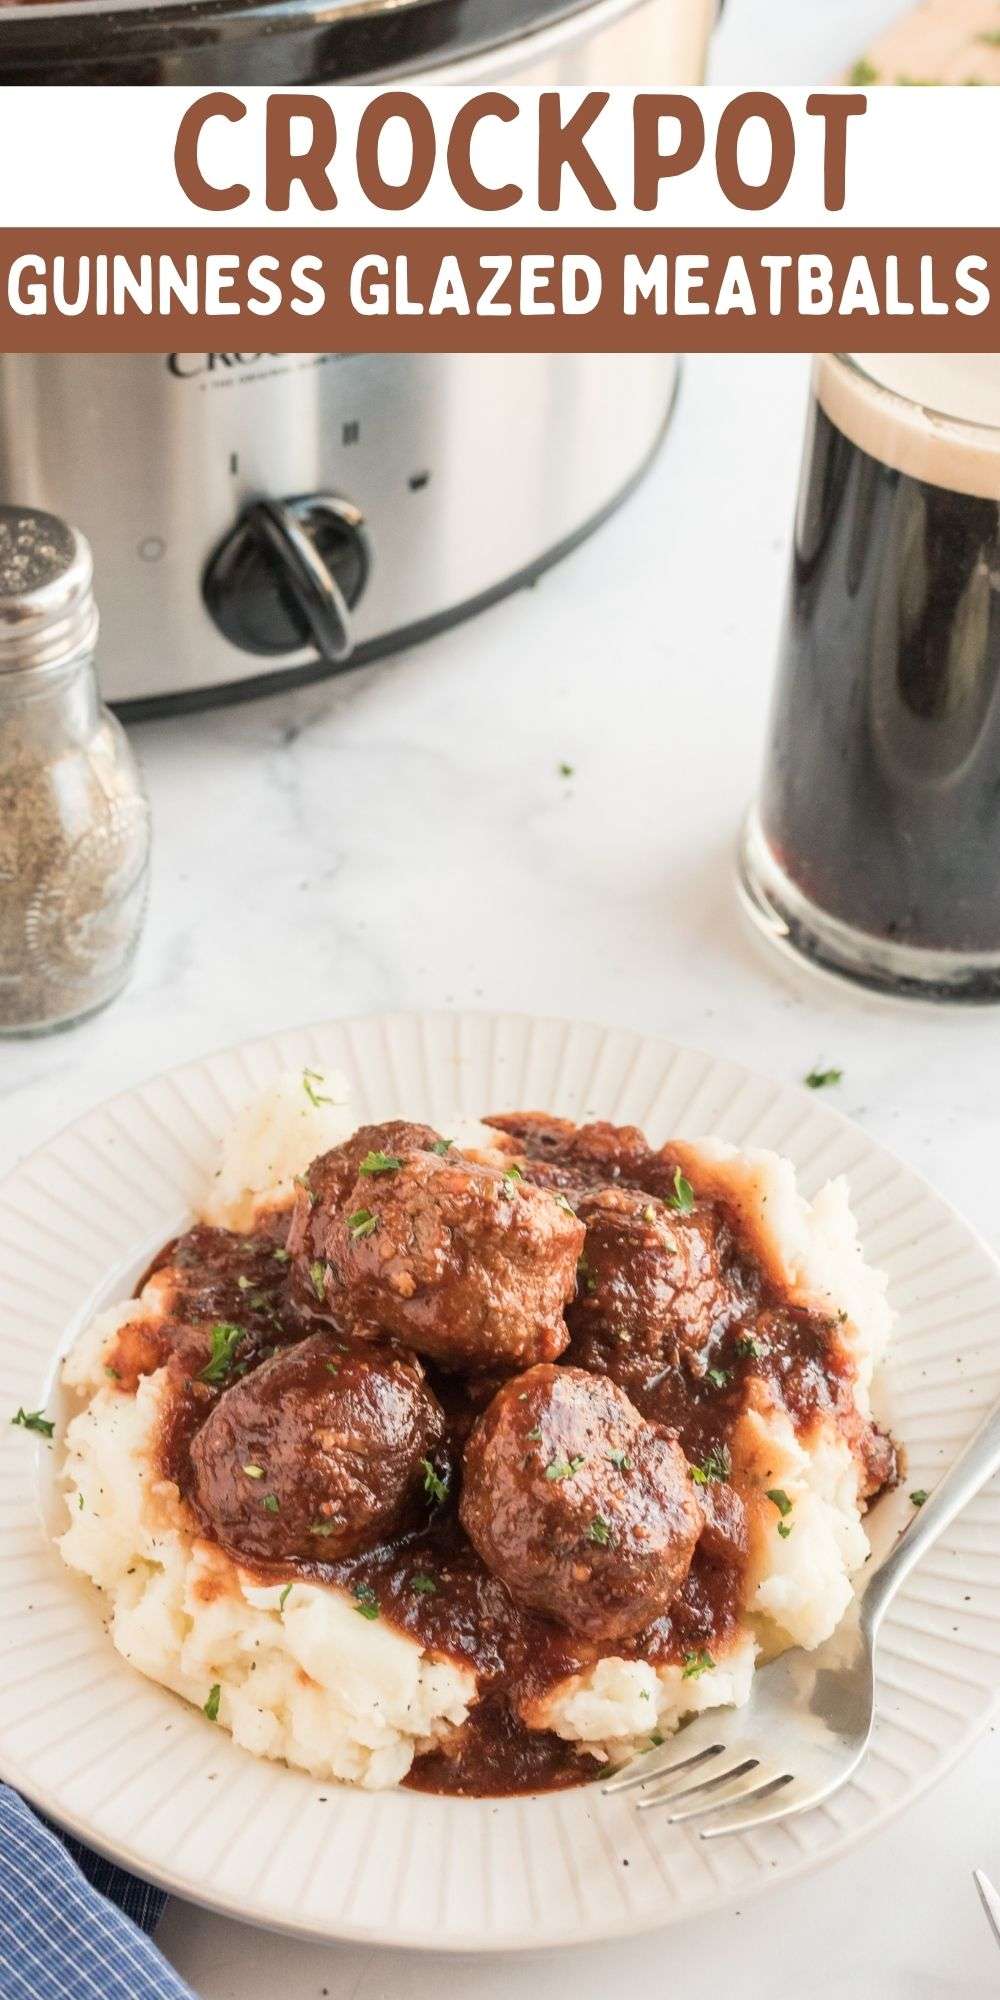 This Crockpot Guinness Glazed Meatballs recipe offers flavorful meatball dish that can either be served as an appetizer or for dinner. via @familyfresh